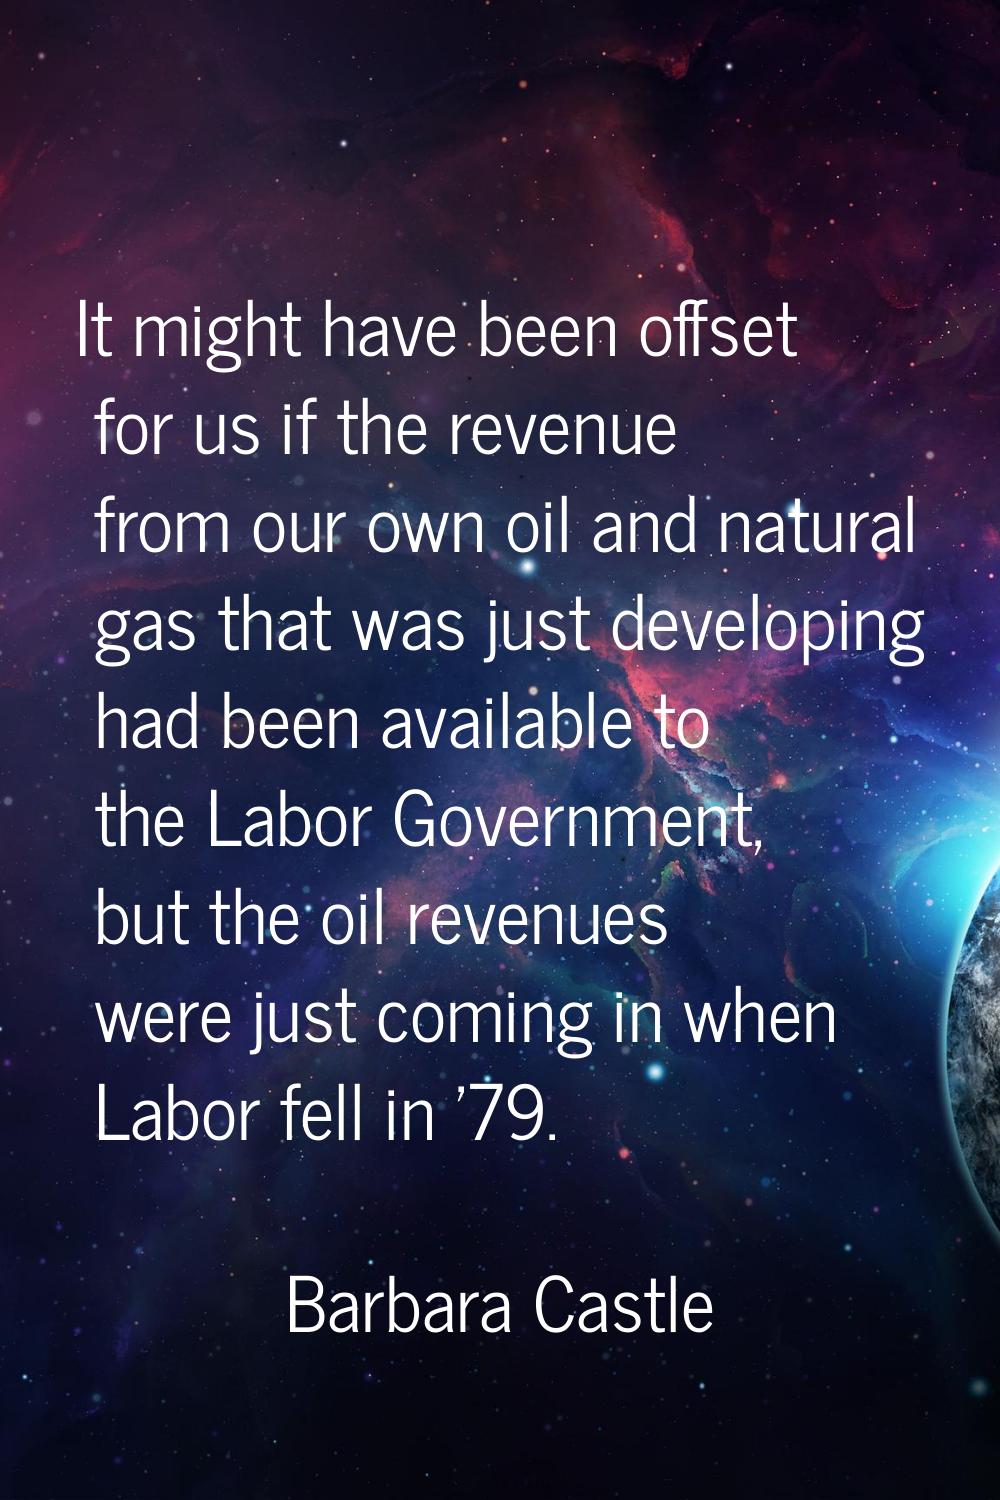 It might have been offset for us if the revenue from our own oil and natural gas that was just deve